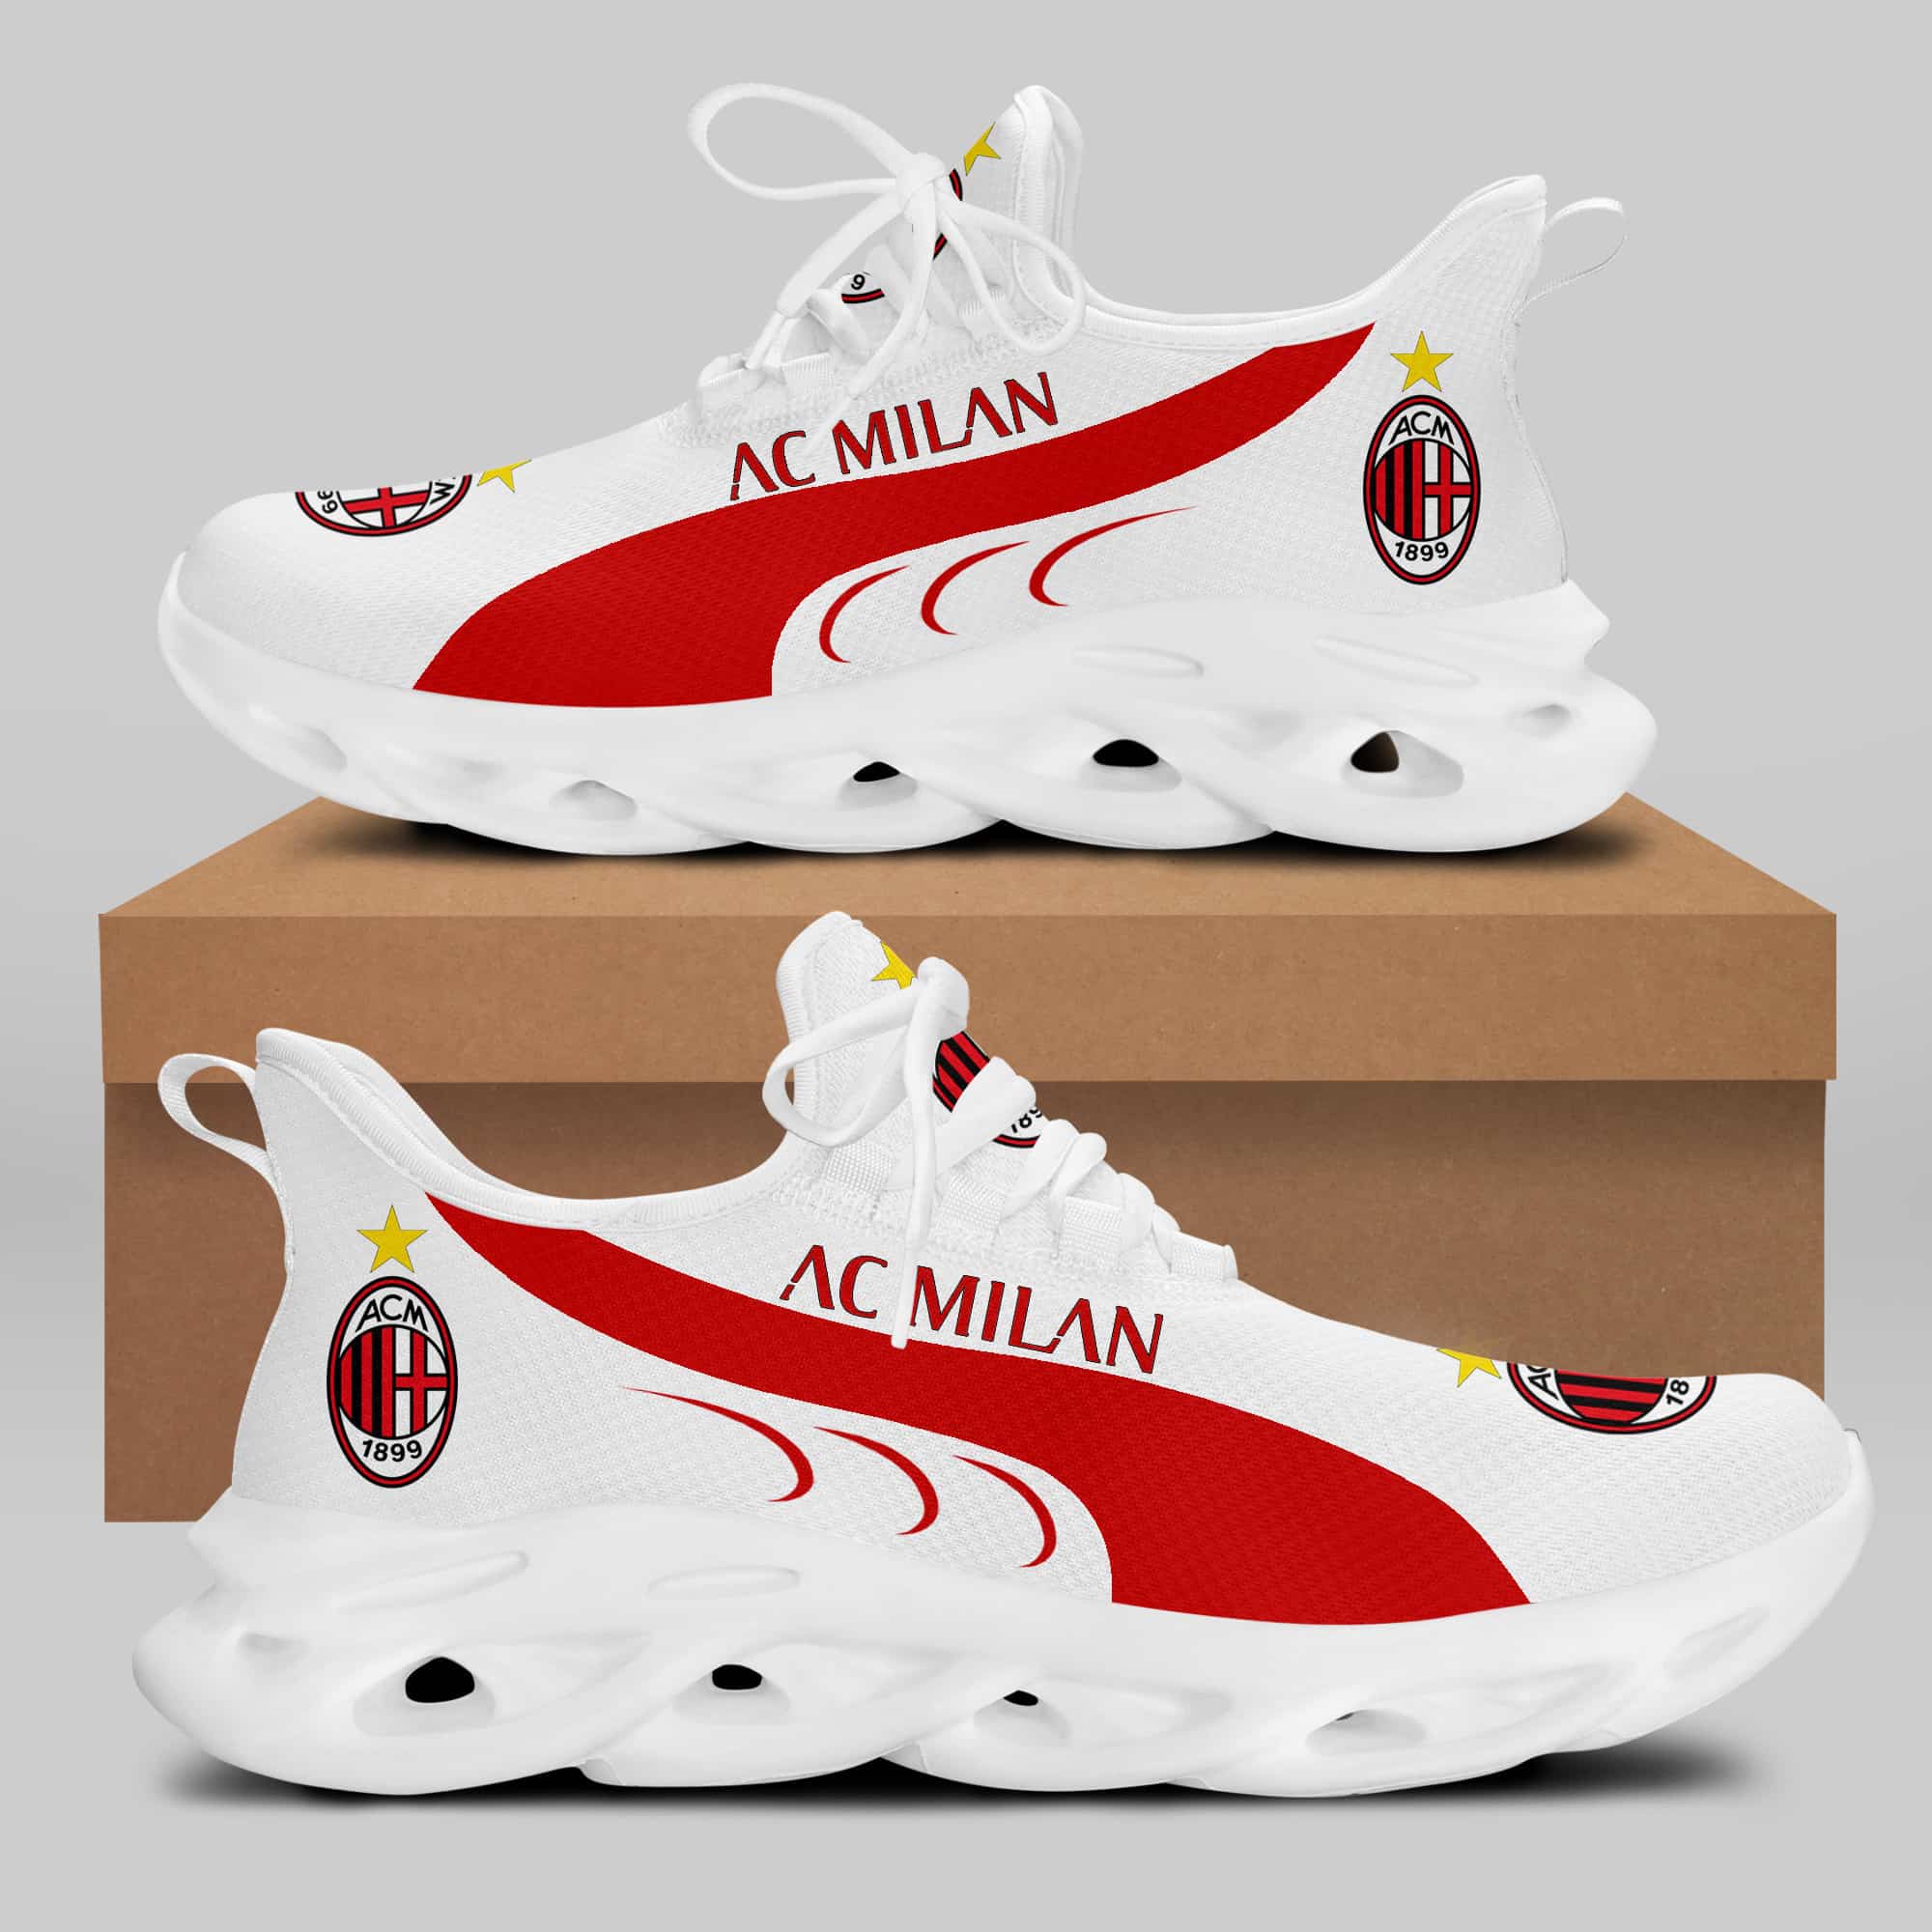 Ac Milan Running Shoes Max Soul Shoes Sneakers Ver 4 1